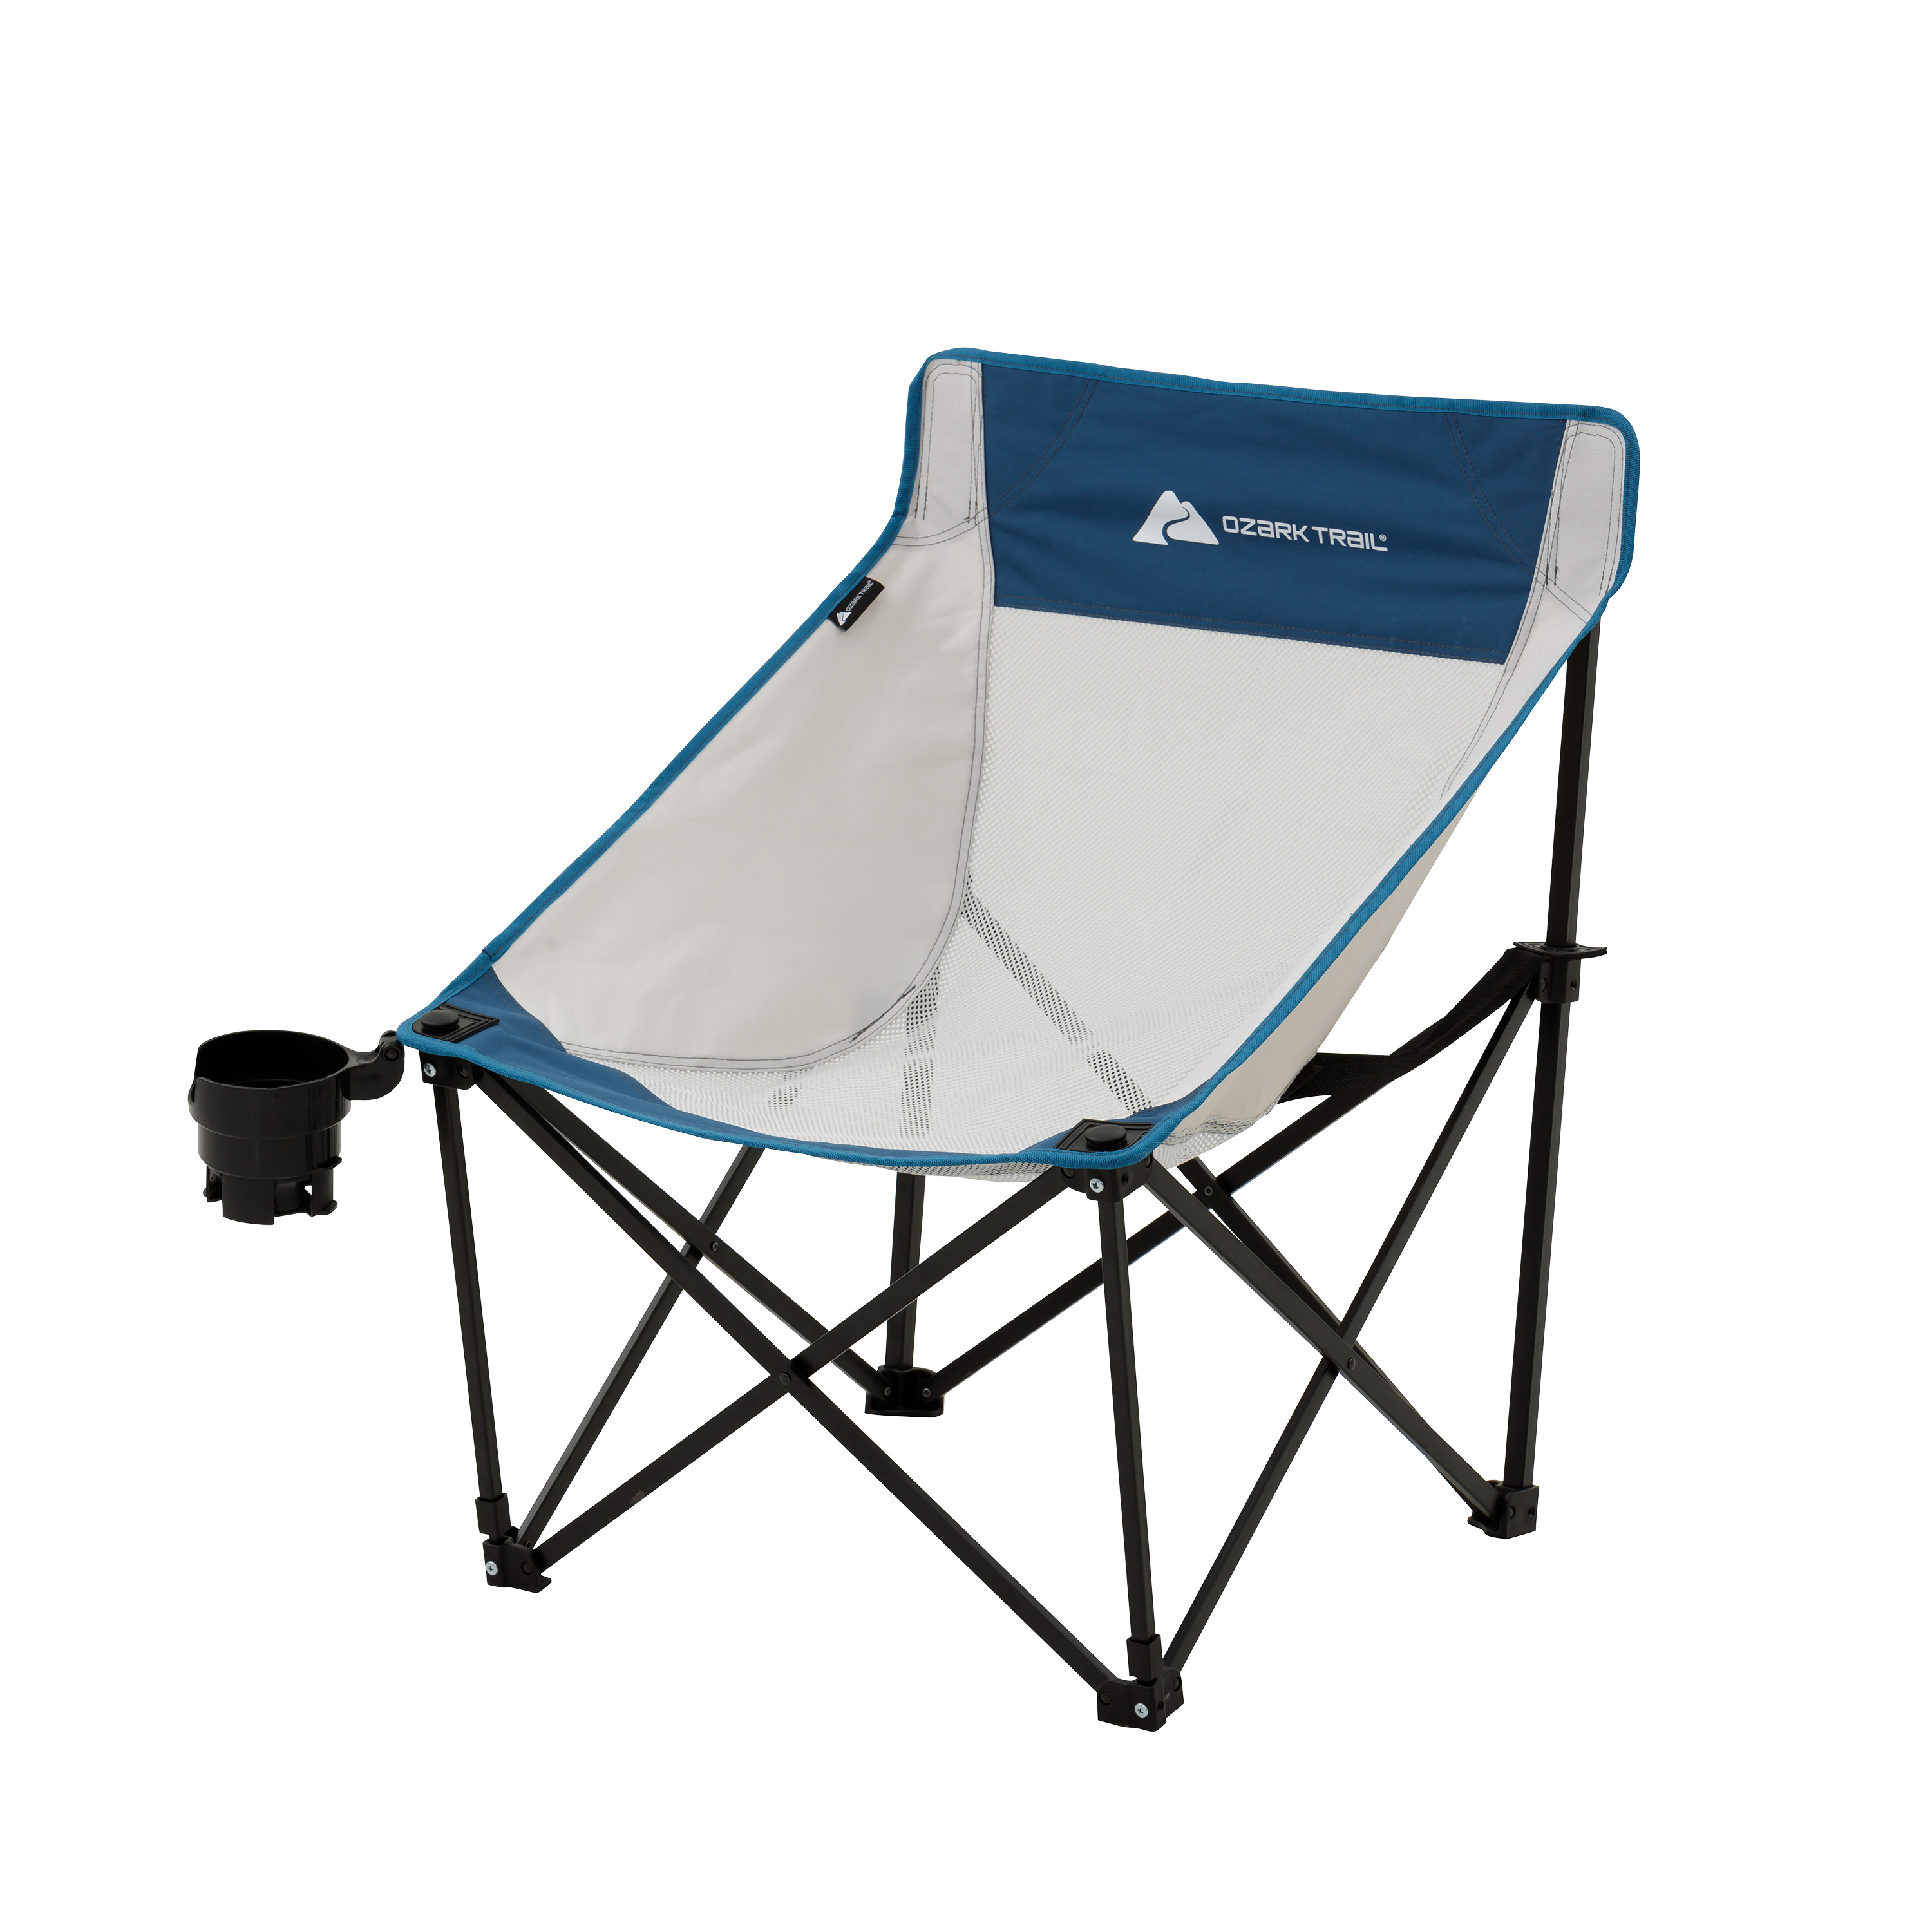 Ozark Trail 4 Piece, Tent, Chair and Table Camping Combo - image 8 of 15